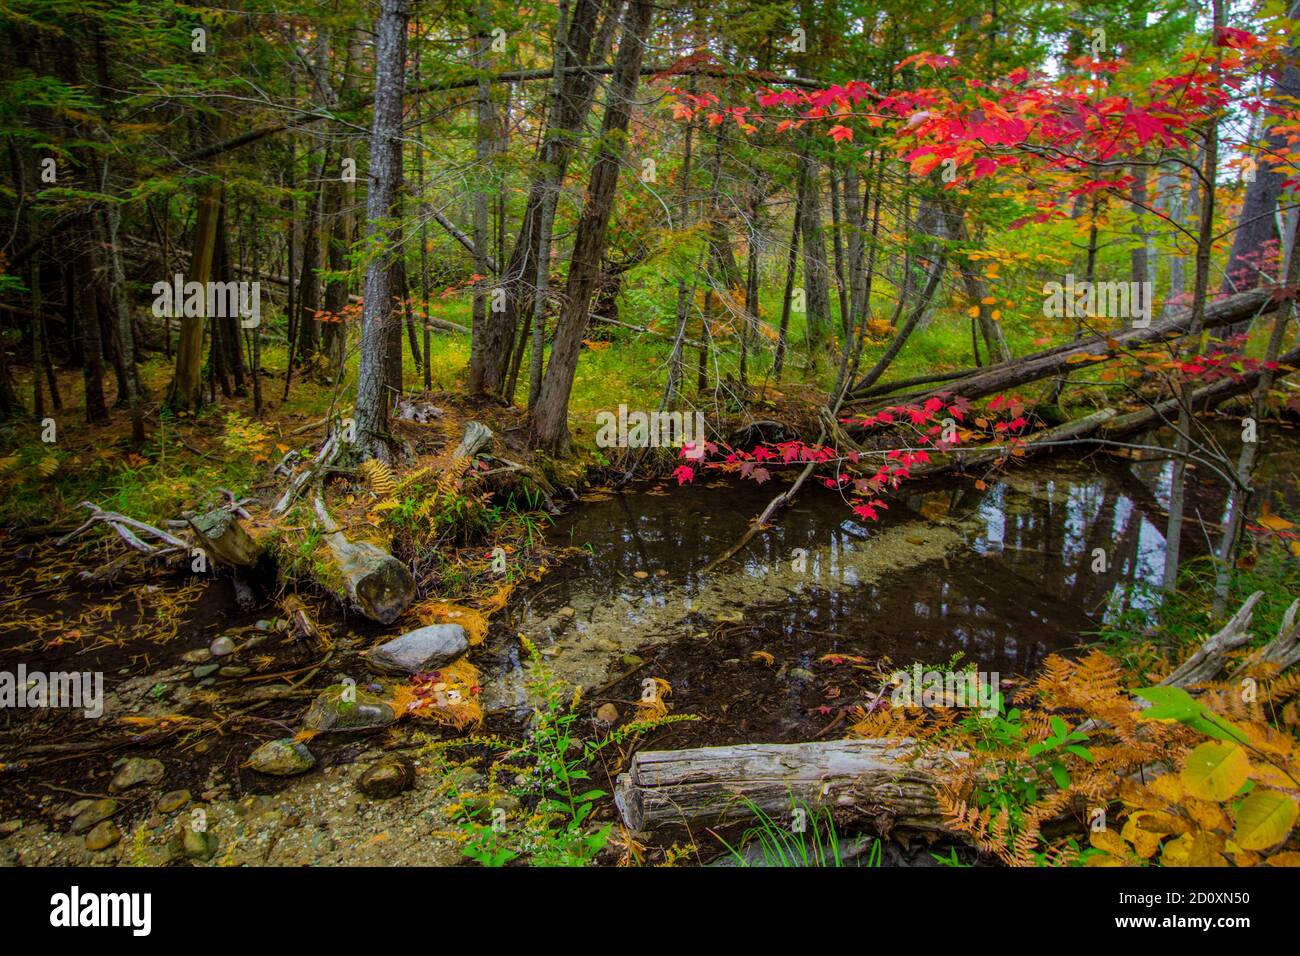 Autumn Forest Landscape. Stream through a forest with fall foliage in ...